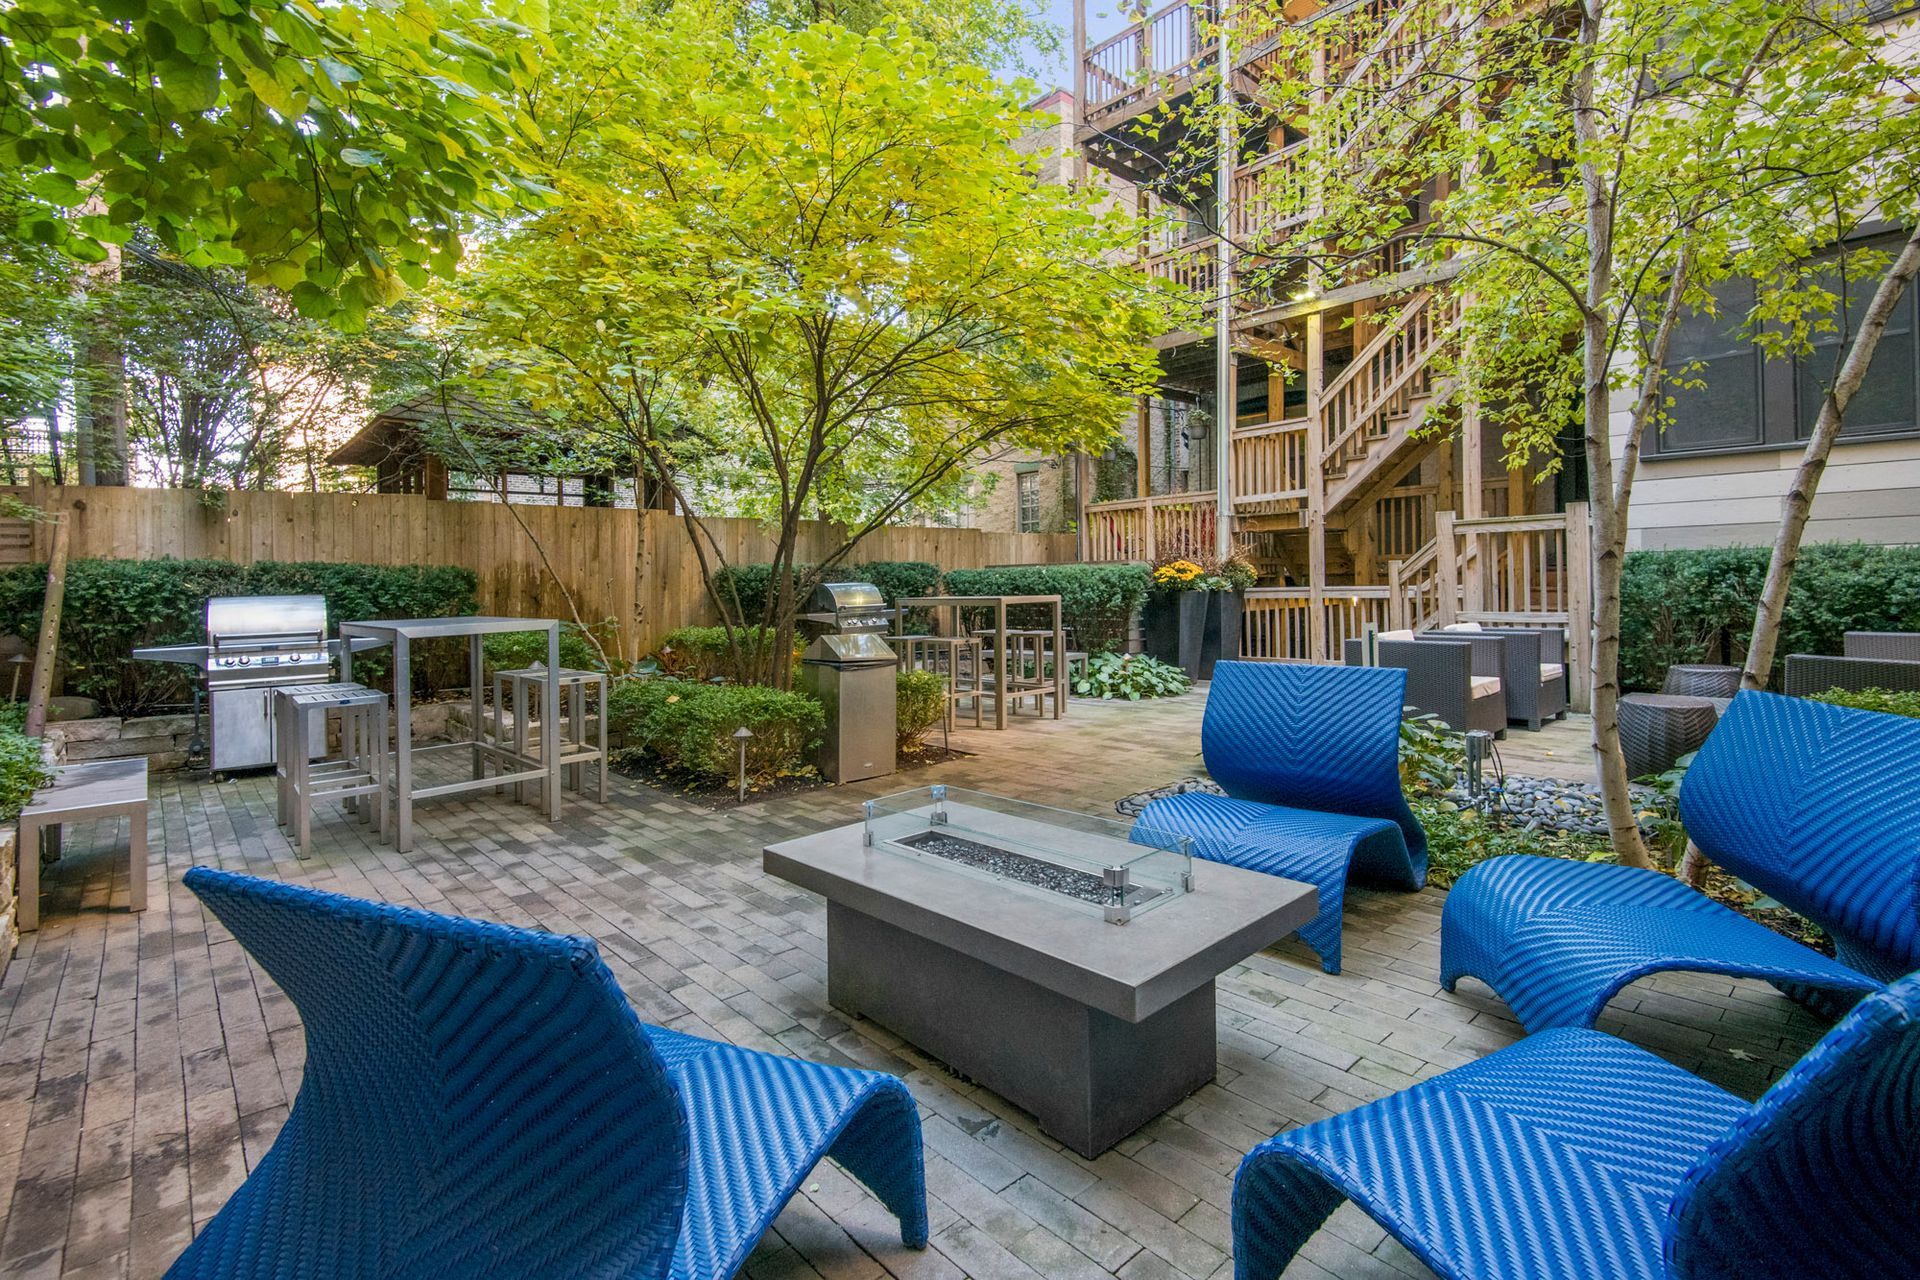 A patio with blue chairs, a table, and a grill at 429 W Melrose Street.